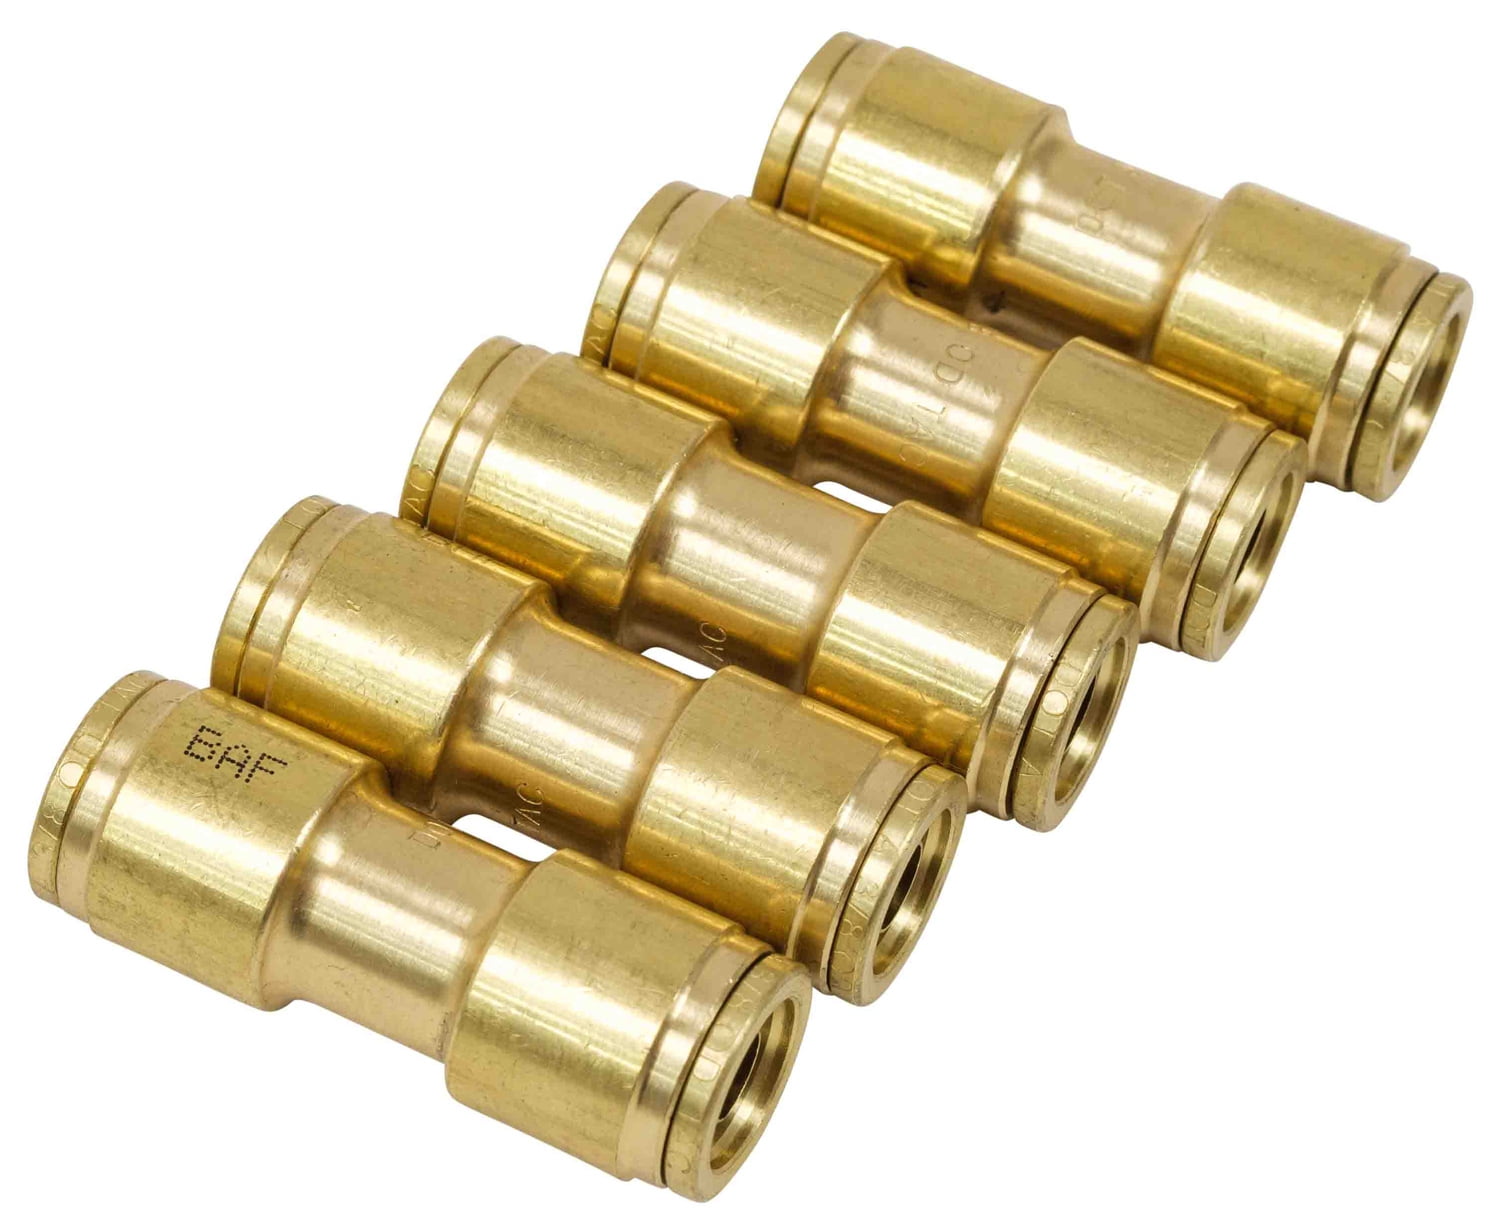 10X Brake Lines Union Brass Straight Compression Fitting Connector 3/16 OD  Tube